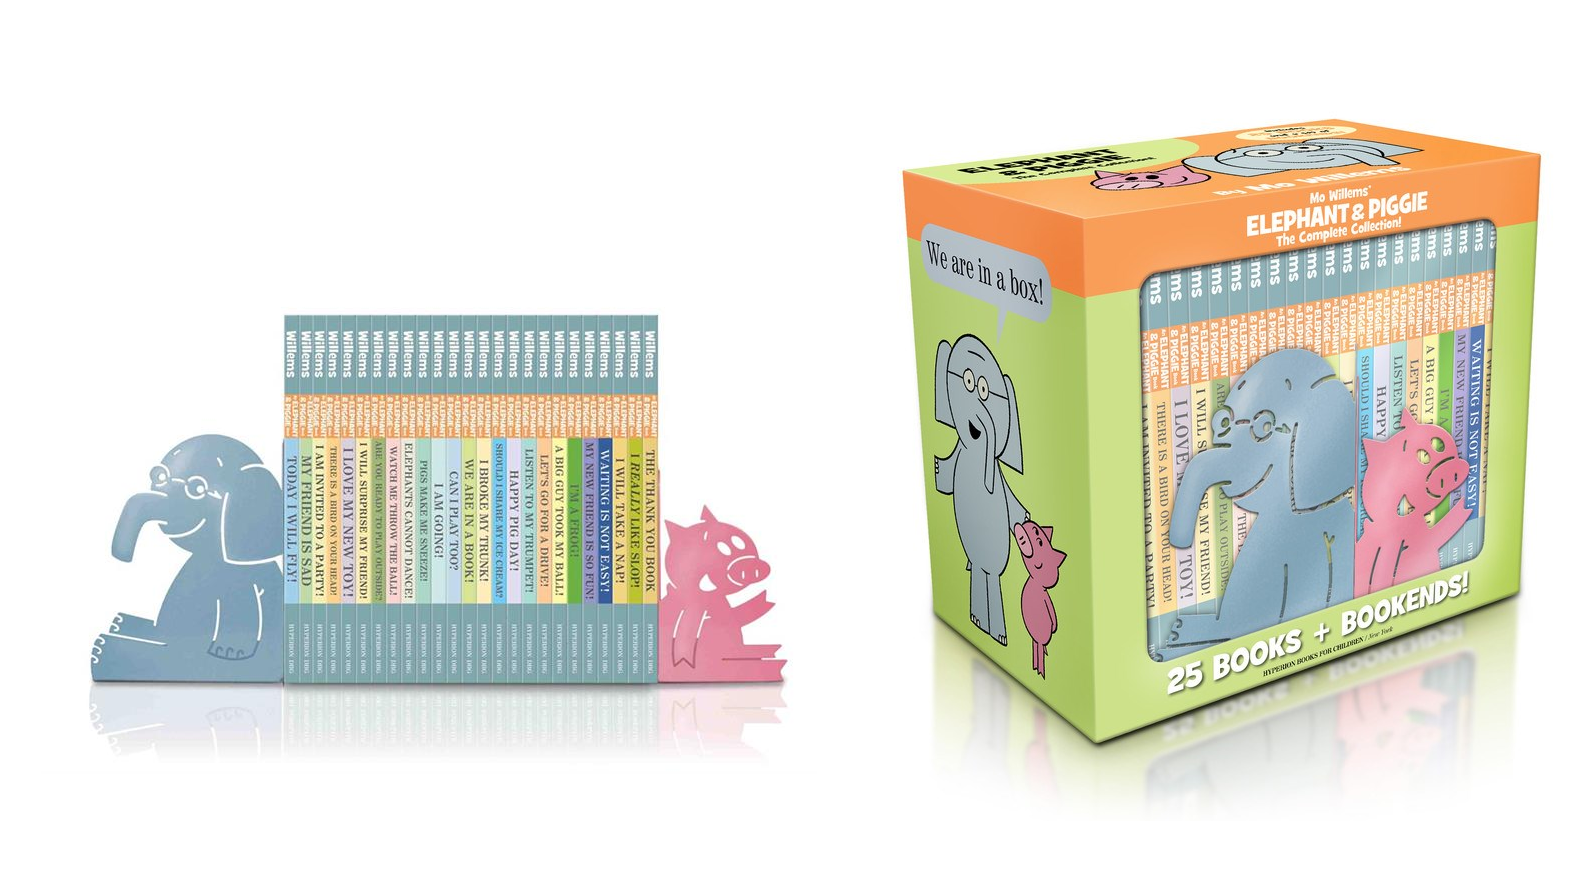 Add 25 hardcover installments of Elephant & Piggie to your kid's